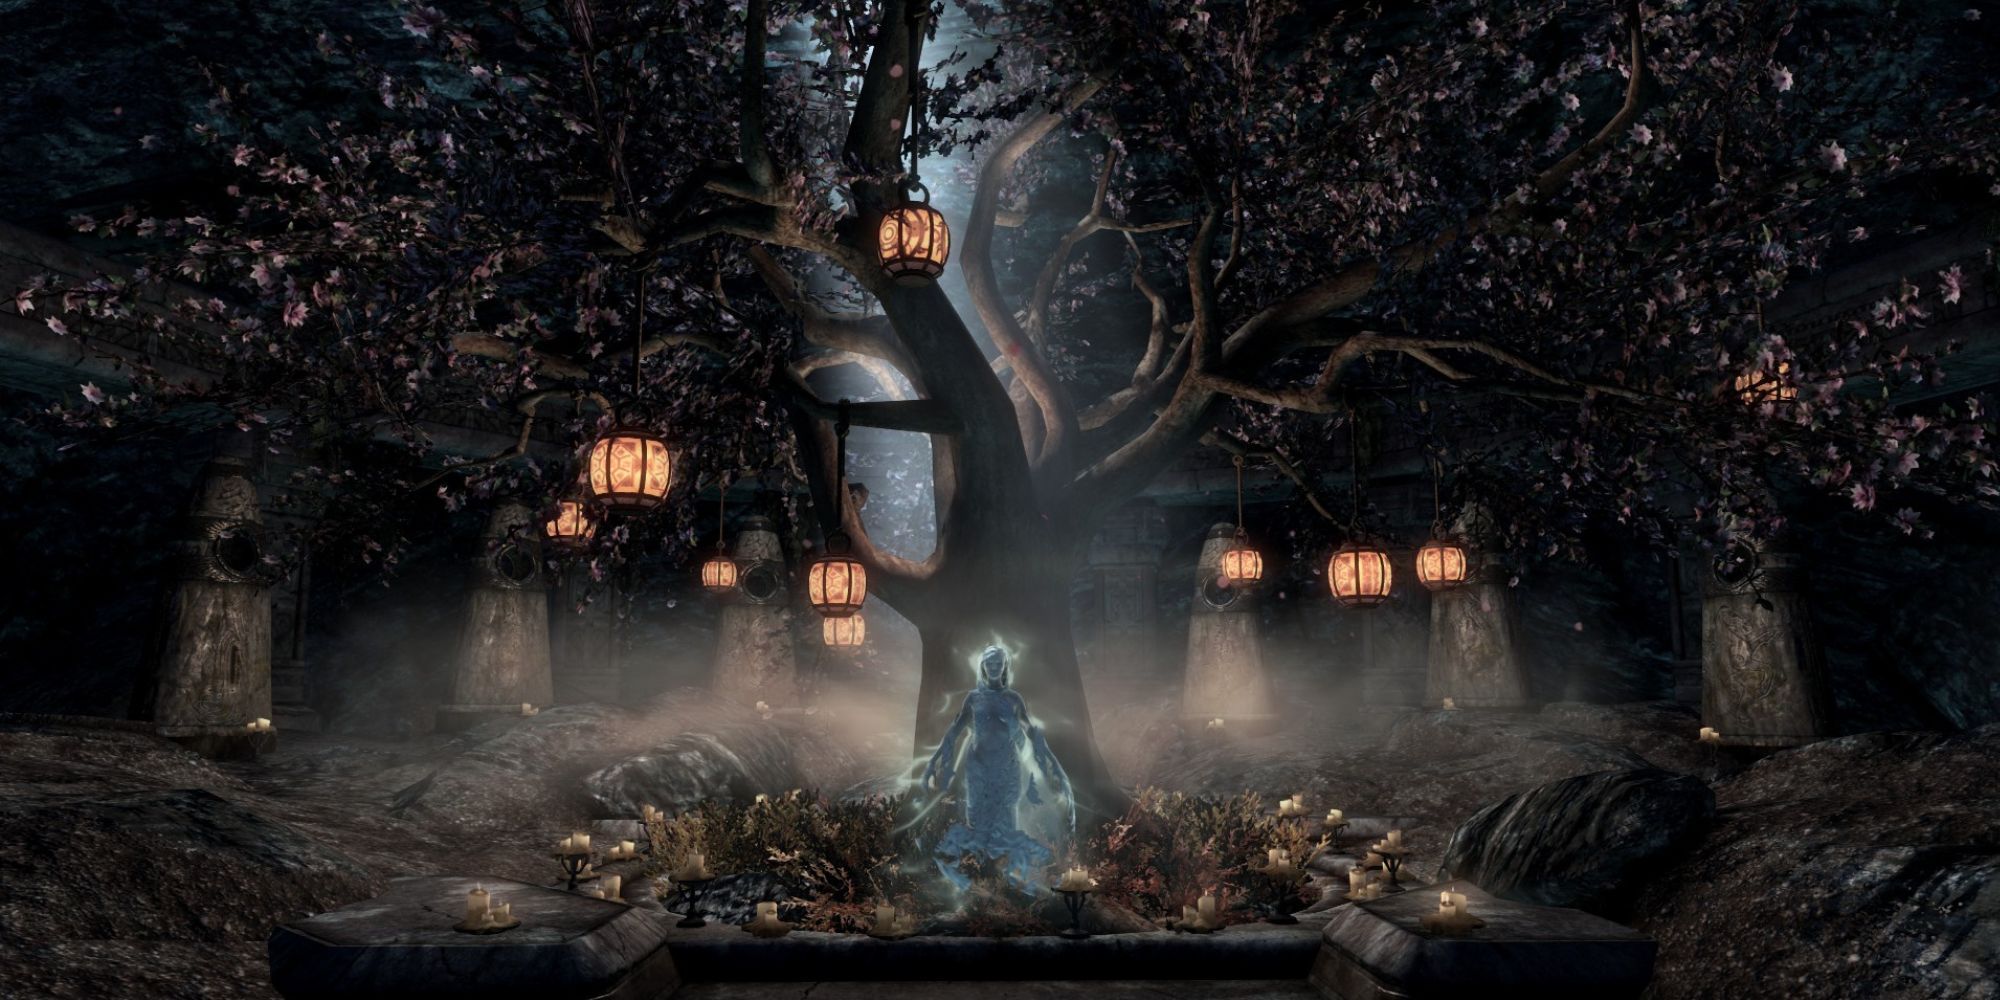 The Refuge Spirit stands in front of the Tree Chamber surrounded by lanterns and standing stones